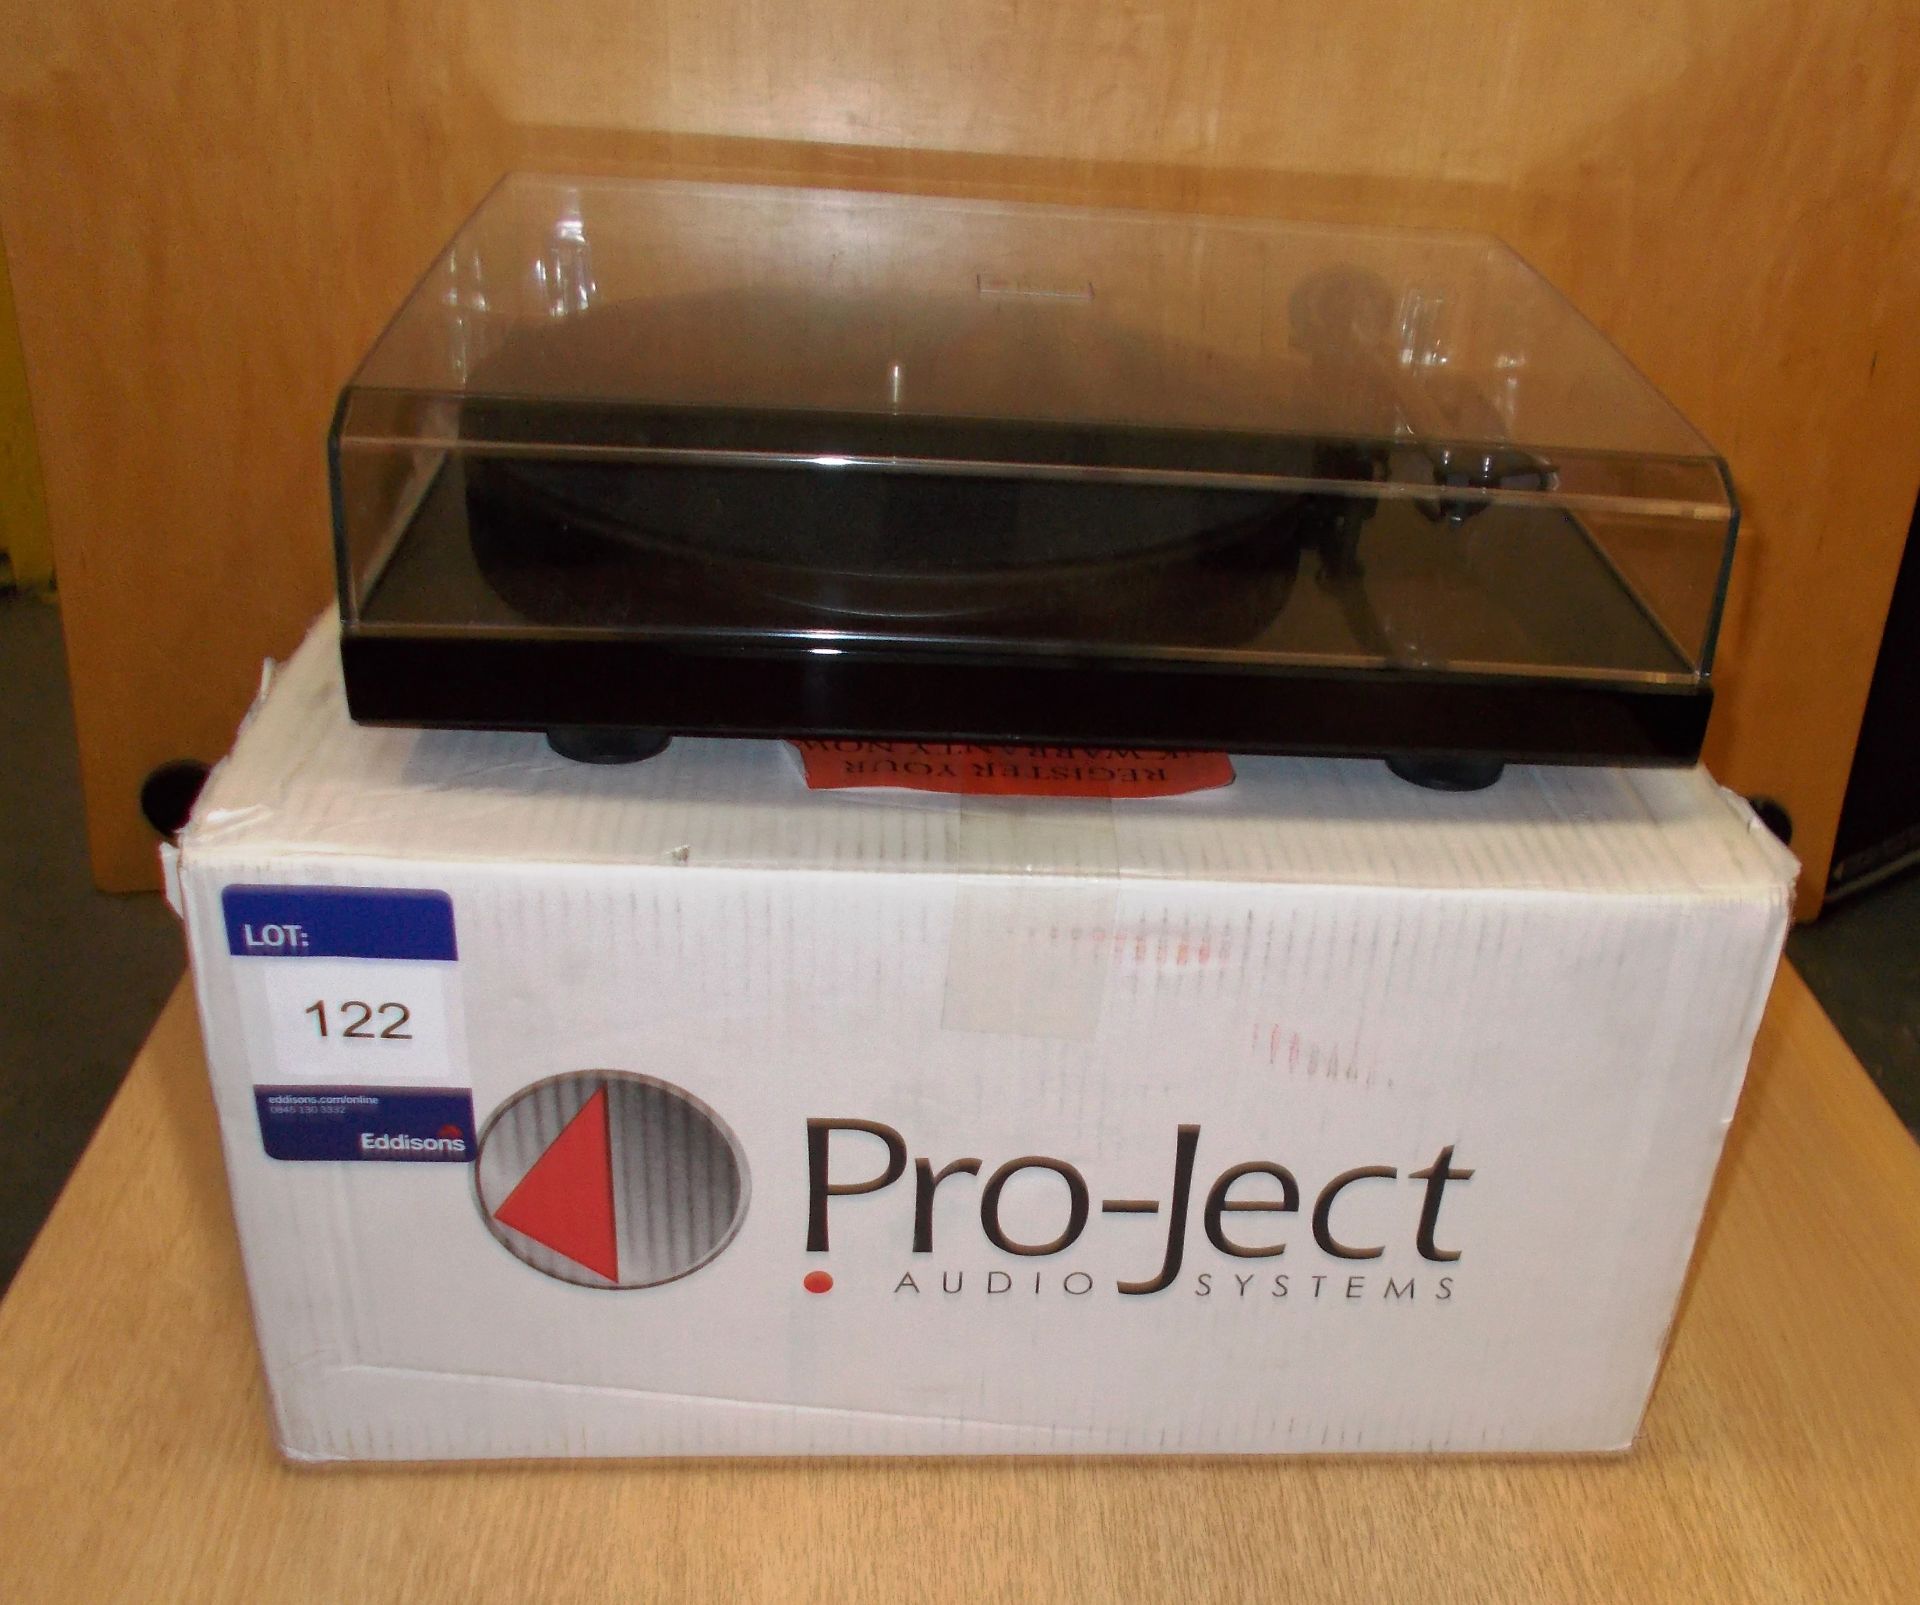 Pro-Ject Debut Carbon Turntable, black (on display) – RRP £350